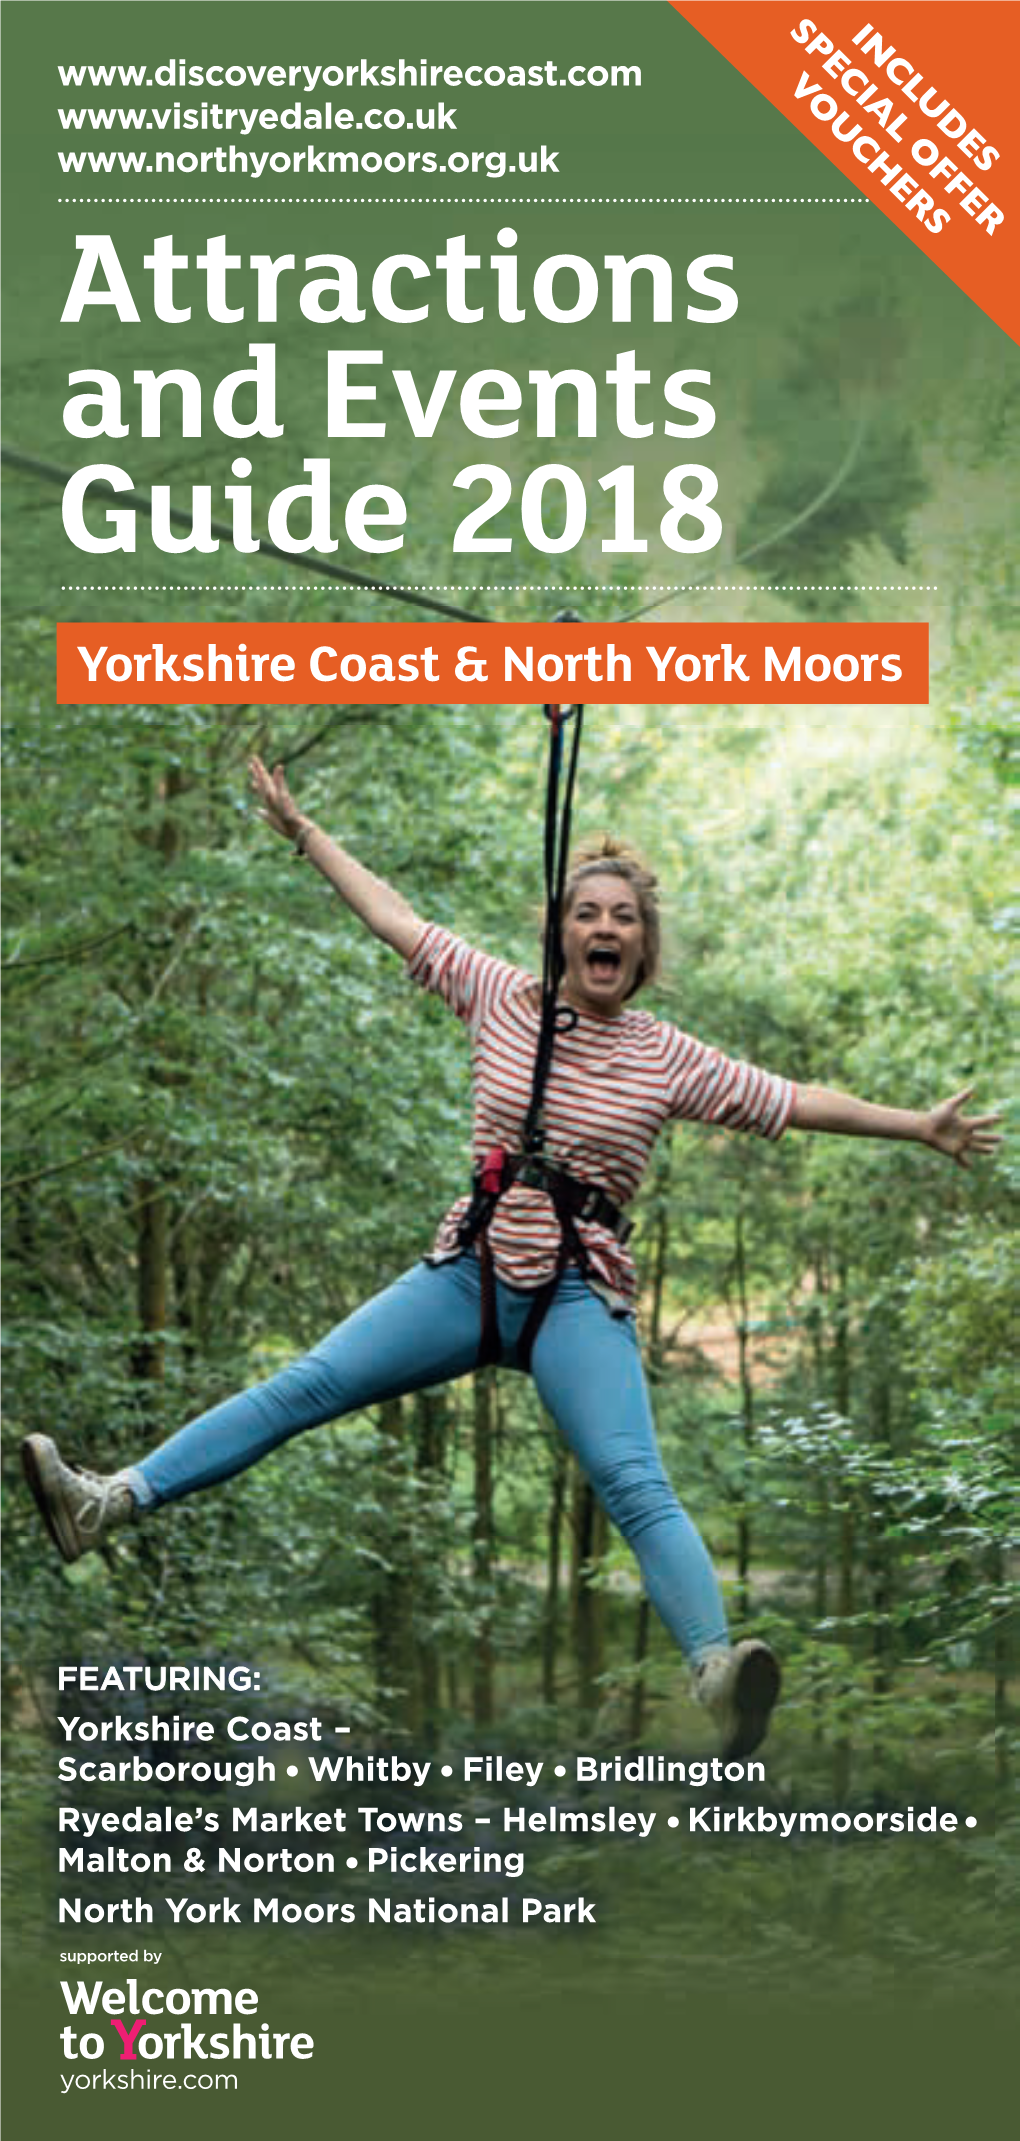 Attractions and Events Guide 2018 Yorkshire Coast & North York Moors